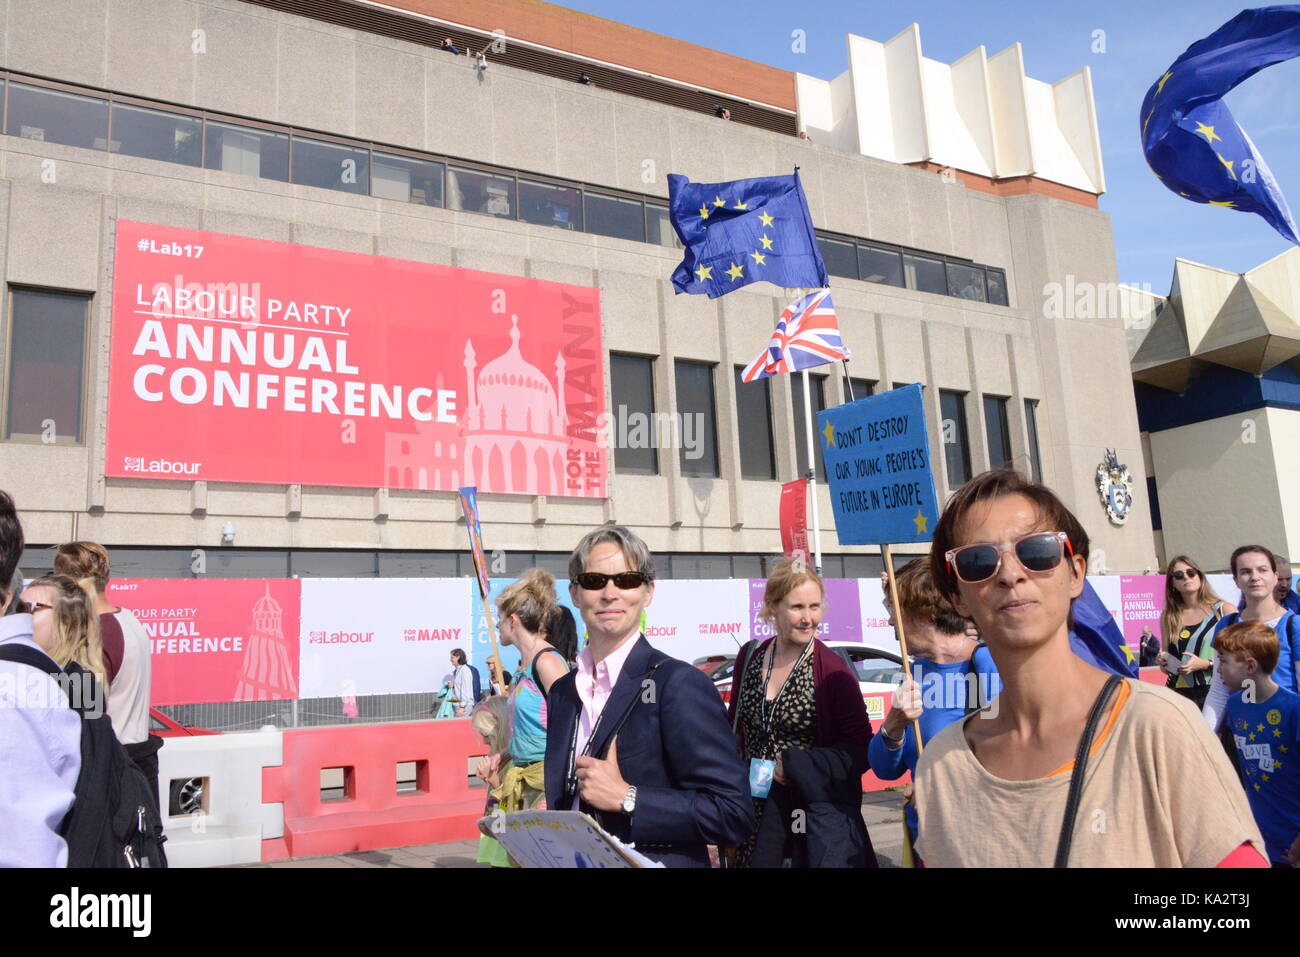 Brighton, UK. 24th September, 2017. March through Brighton, Sussex, United Kingdom by members and supporters of Brighton and Hove for EU - a non-party political group that brings together people with a range of views who are united in their desire for the United Kingdom to remain part of the European Union. Credit: Aztec Images/Alamy Live News Stock Photo